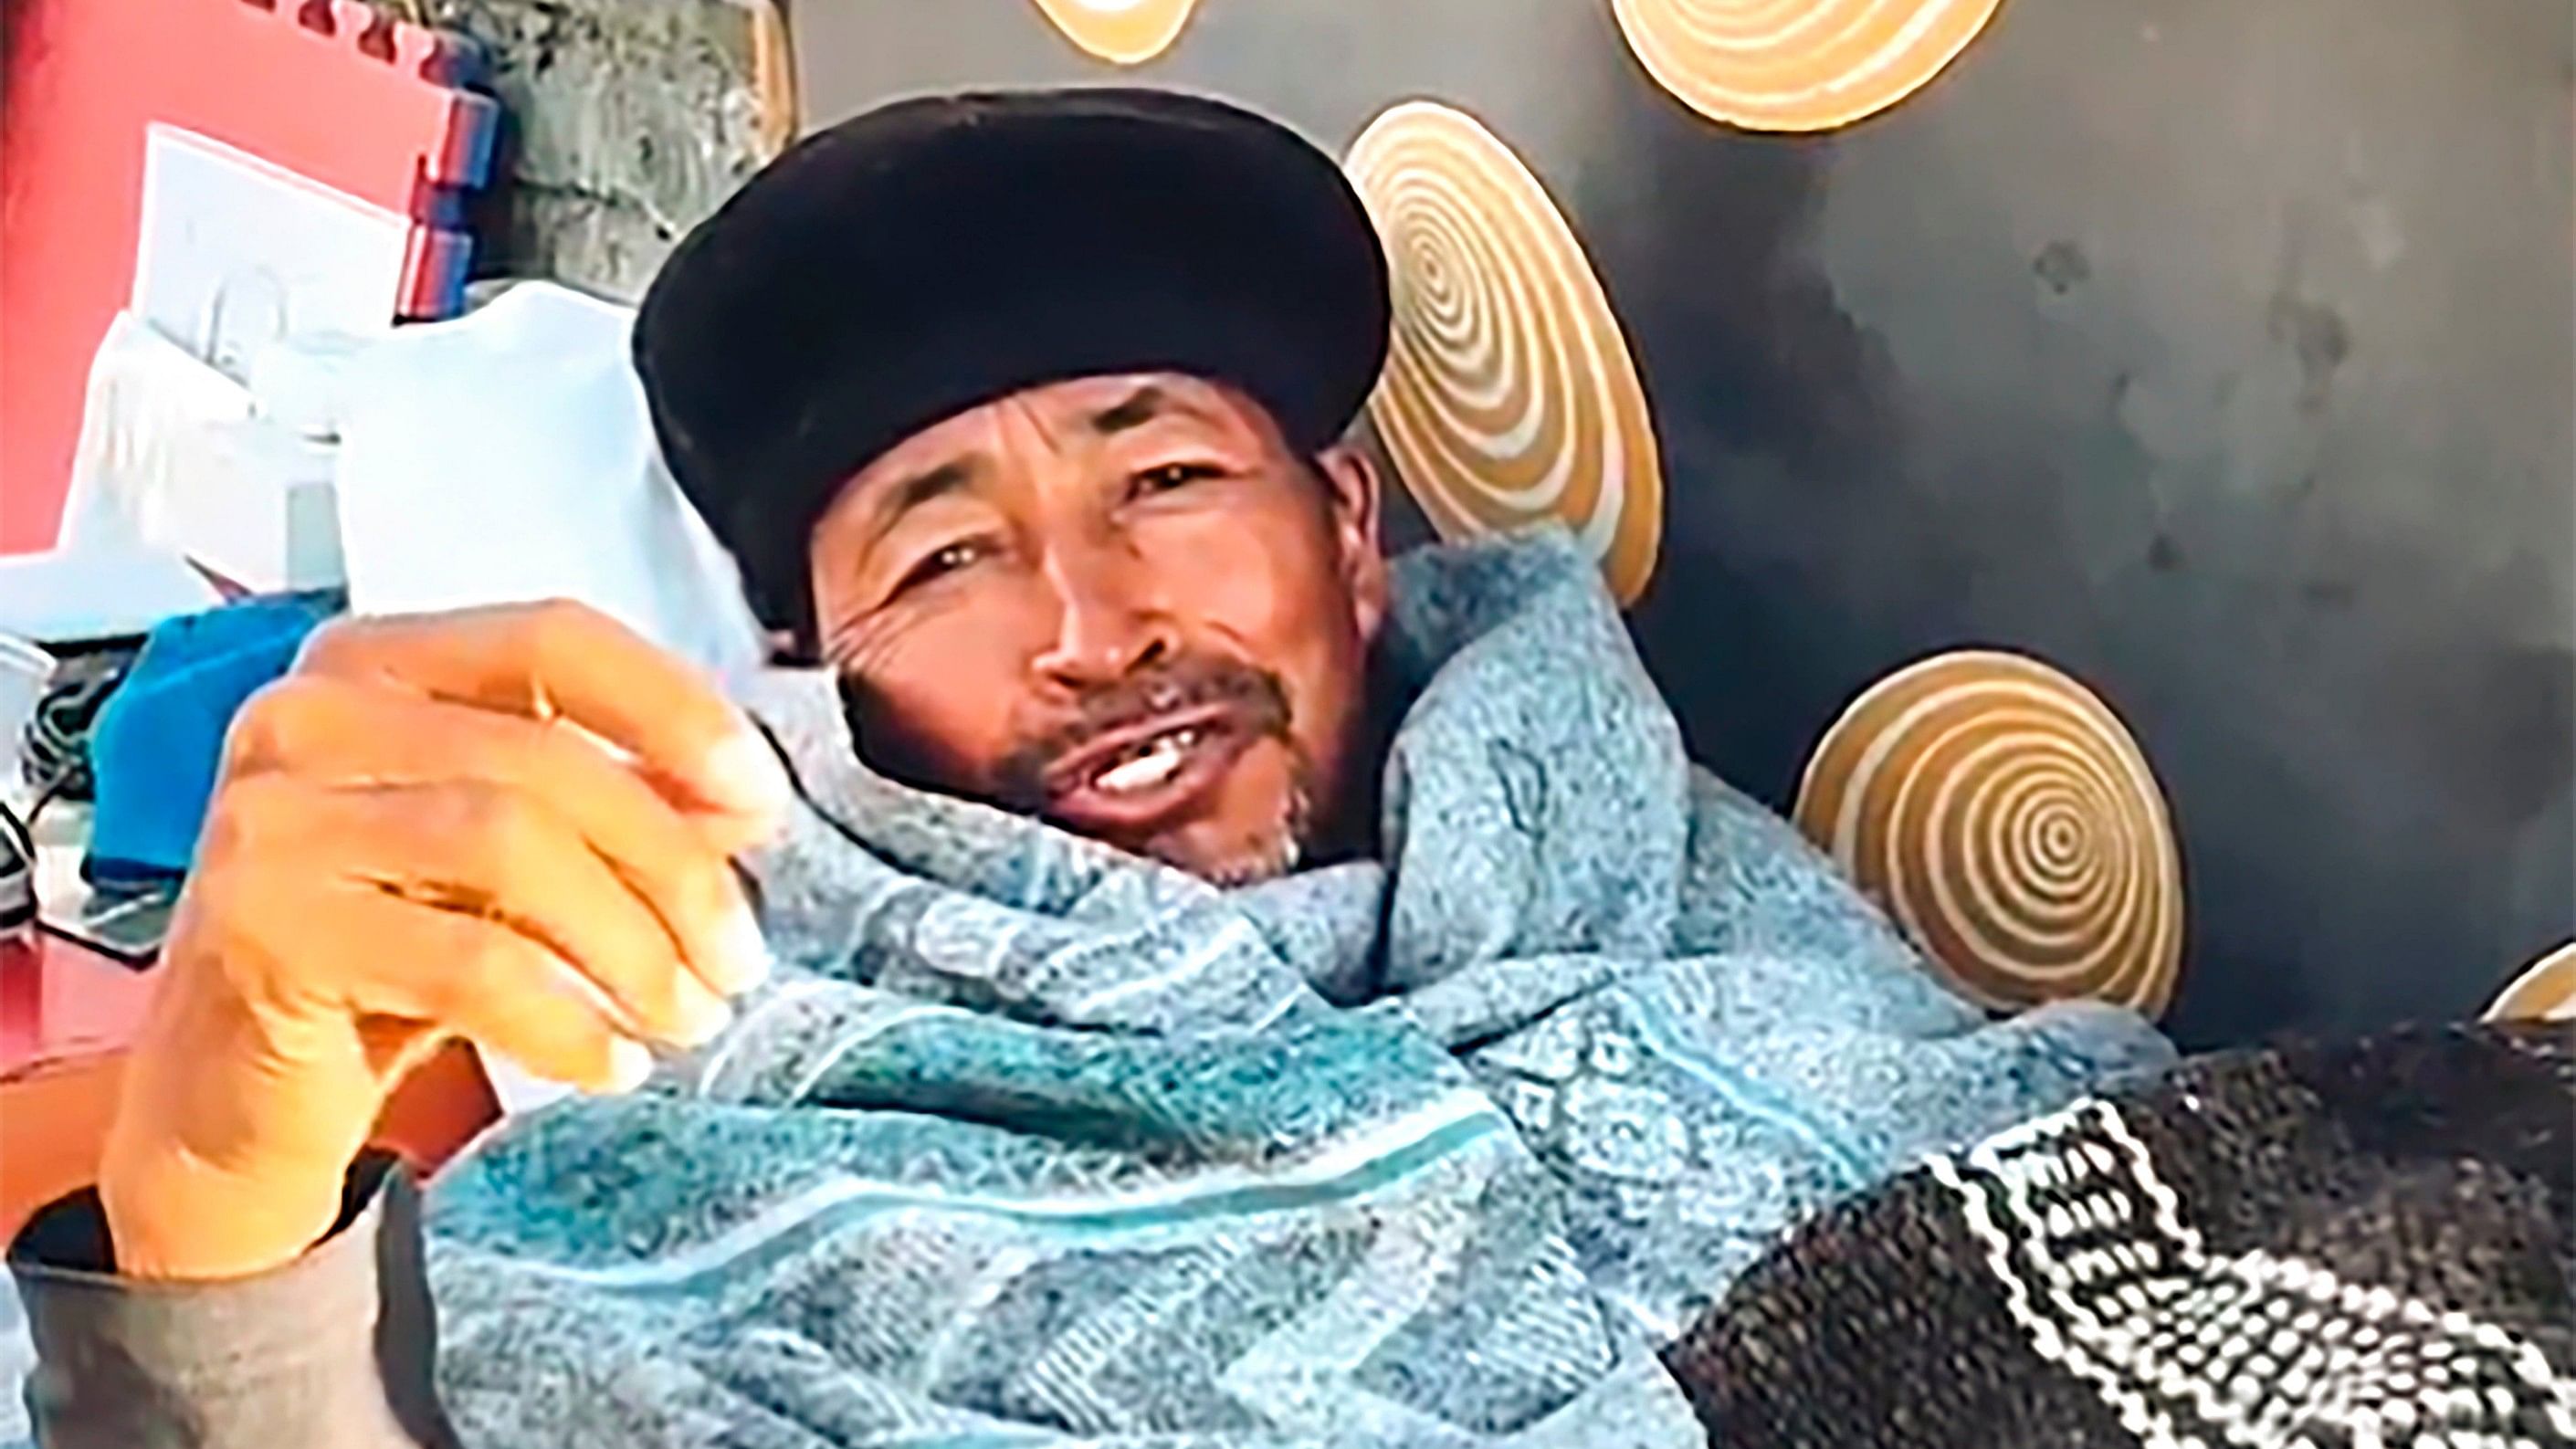 <div class="paragraphs"><p>Education reformist and climate activist Sonam Wangchuk speaks on the 21st day of his 'climate fast' during a hunger strike with others demanding statehood for Ladakh and its inclusion in the Sixth Schedule of the Constitution. </p></div>